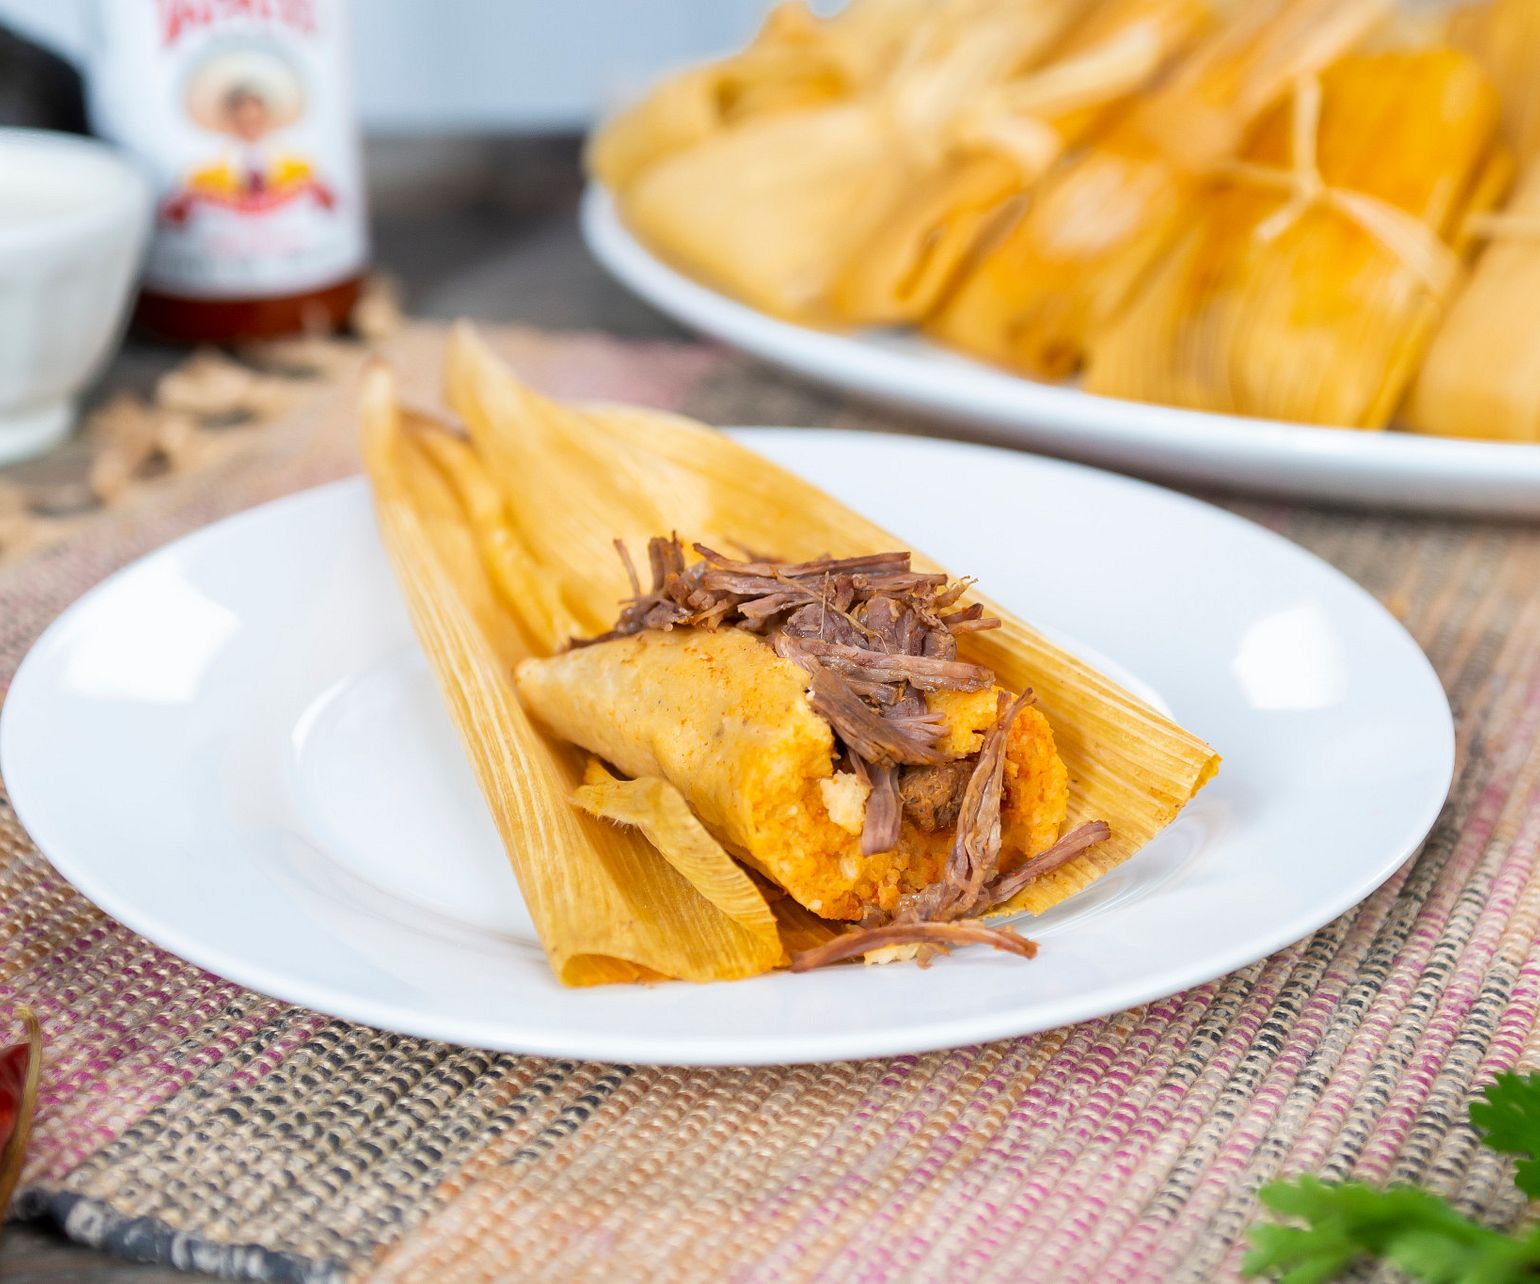 Tapatio Hot Sauce™ Beef Tamales